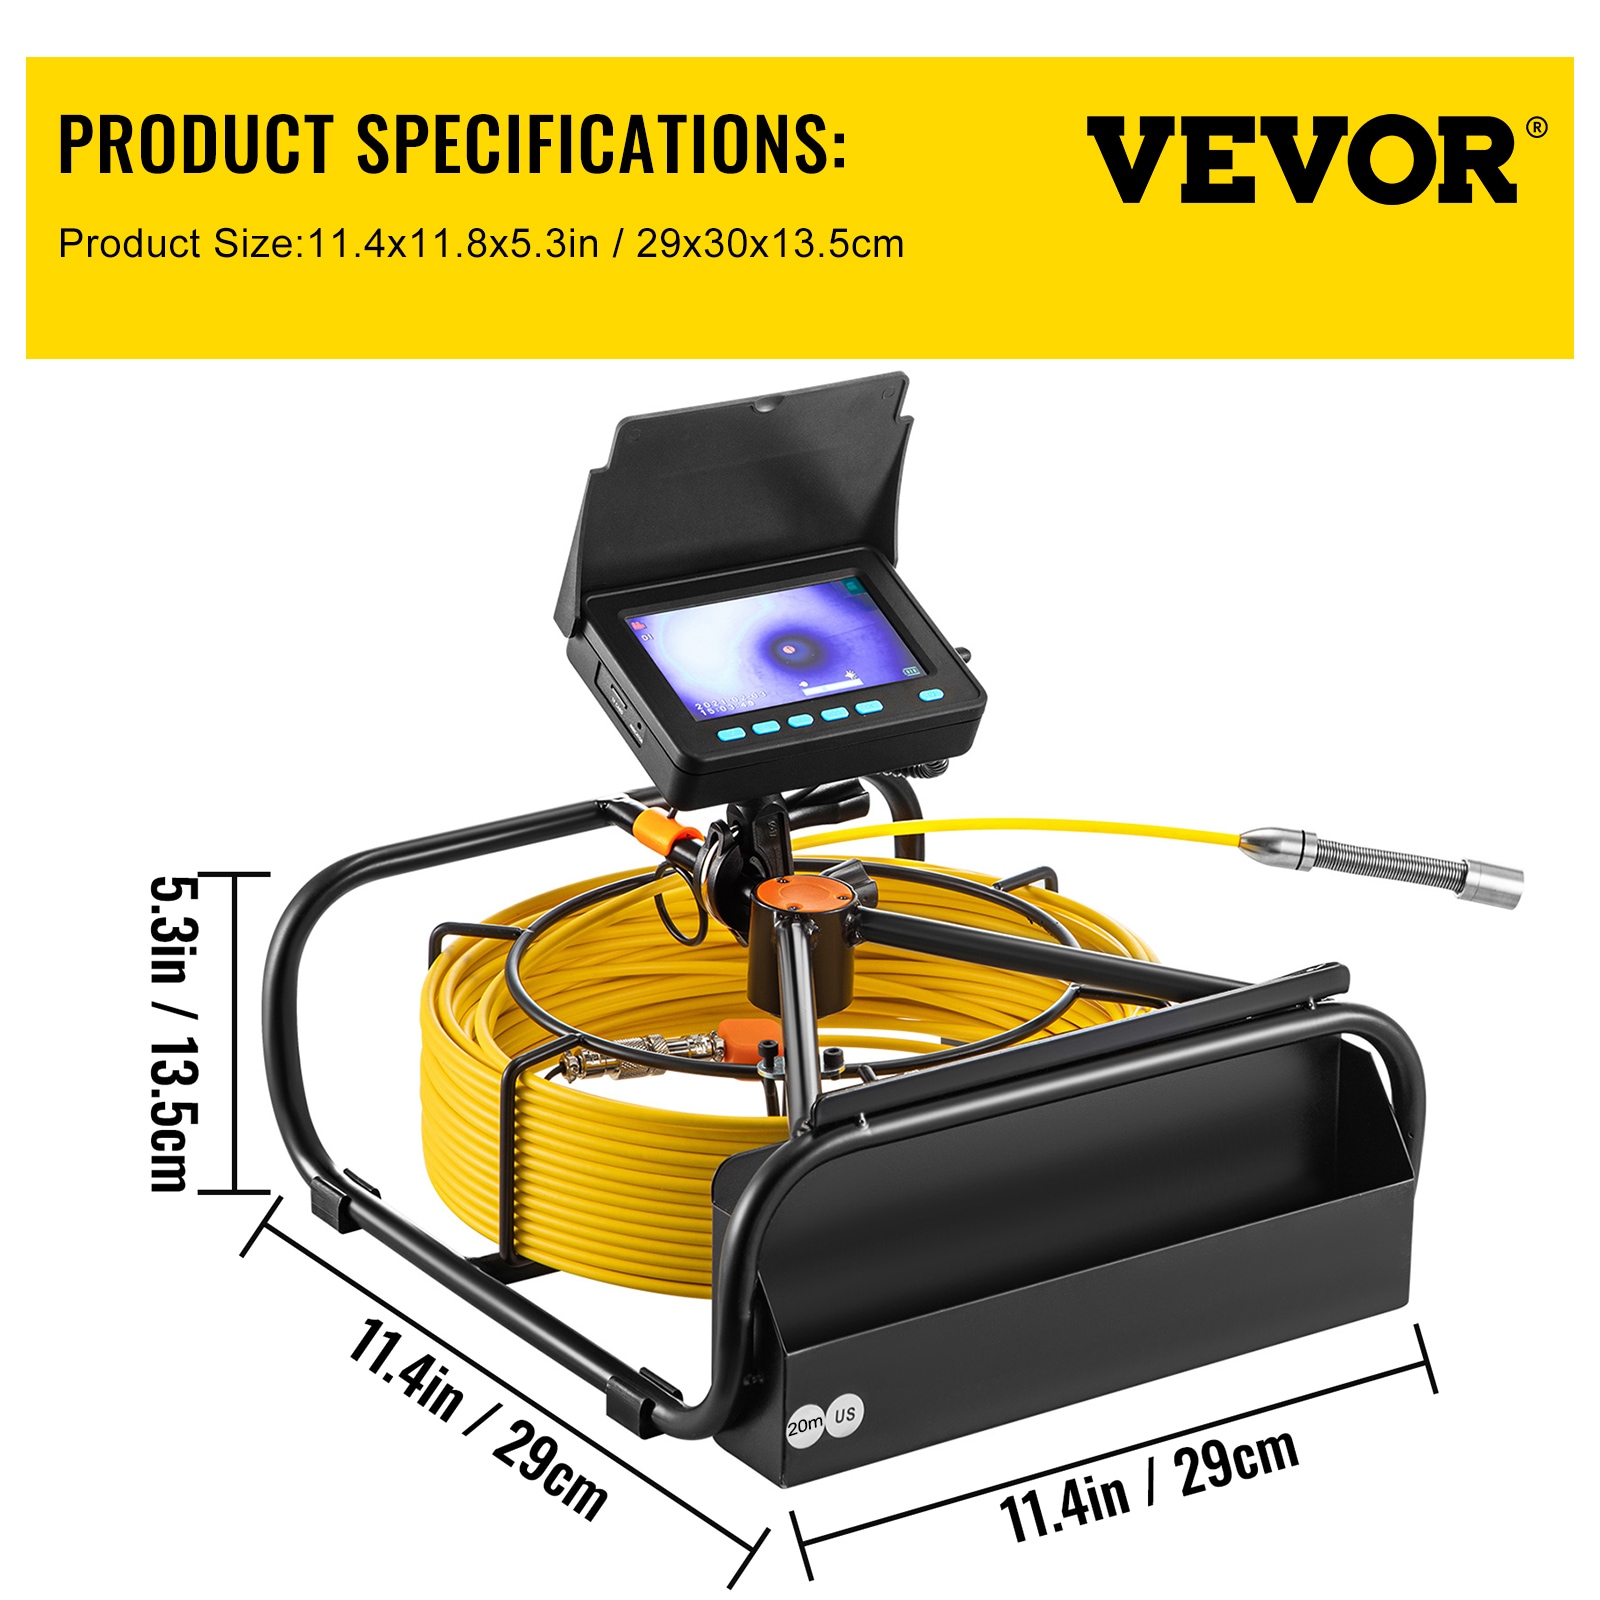 VEVOR Sewer Camera, 65.6Ft 4.3-in Screen, Pipeline Inspection Camera W/Dvr  Function and Snake Cable, Waterproof Ip68 Borescope with LED Lights, Industrial  Endoscope For Home Wall Duct Drain Pipe Plumbing in the Inspection